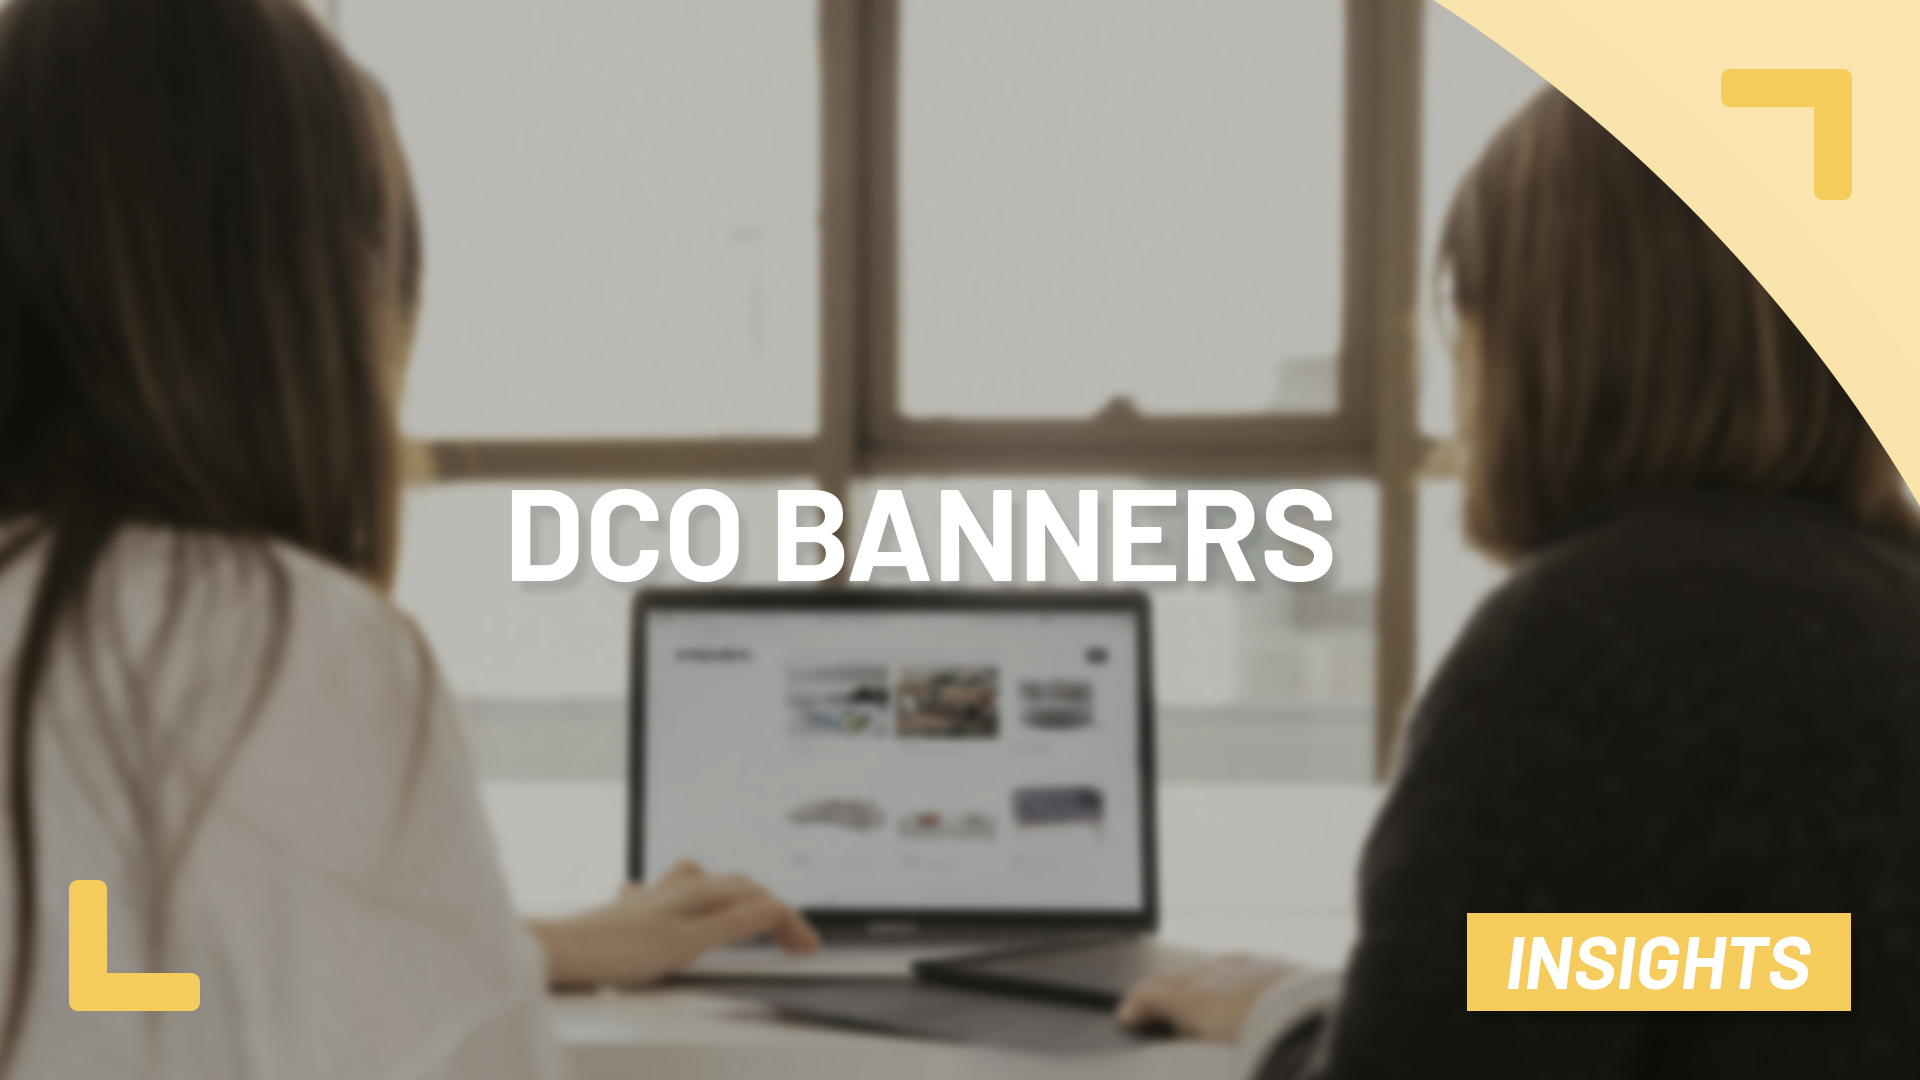 DCO banners: Why it’s relevant for you as an advertiser